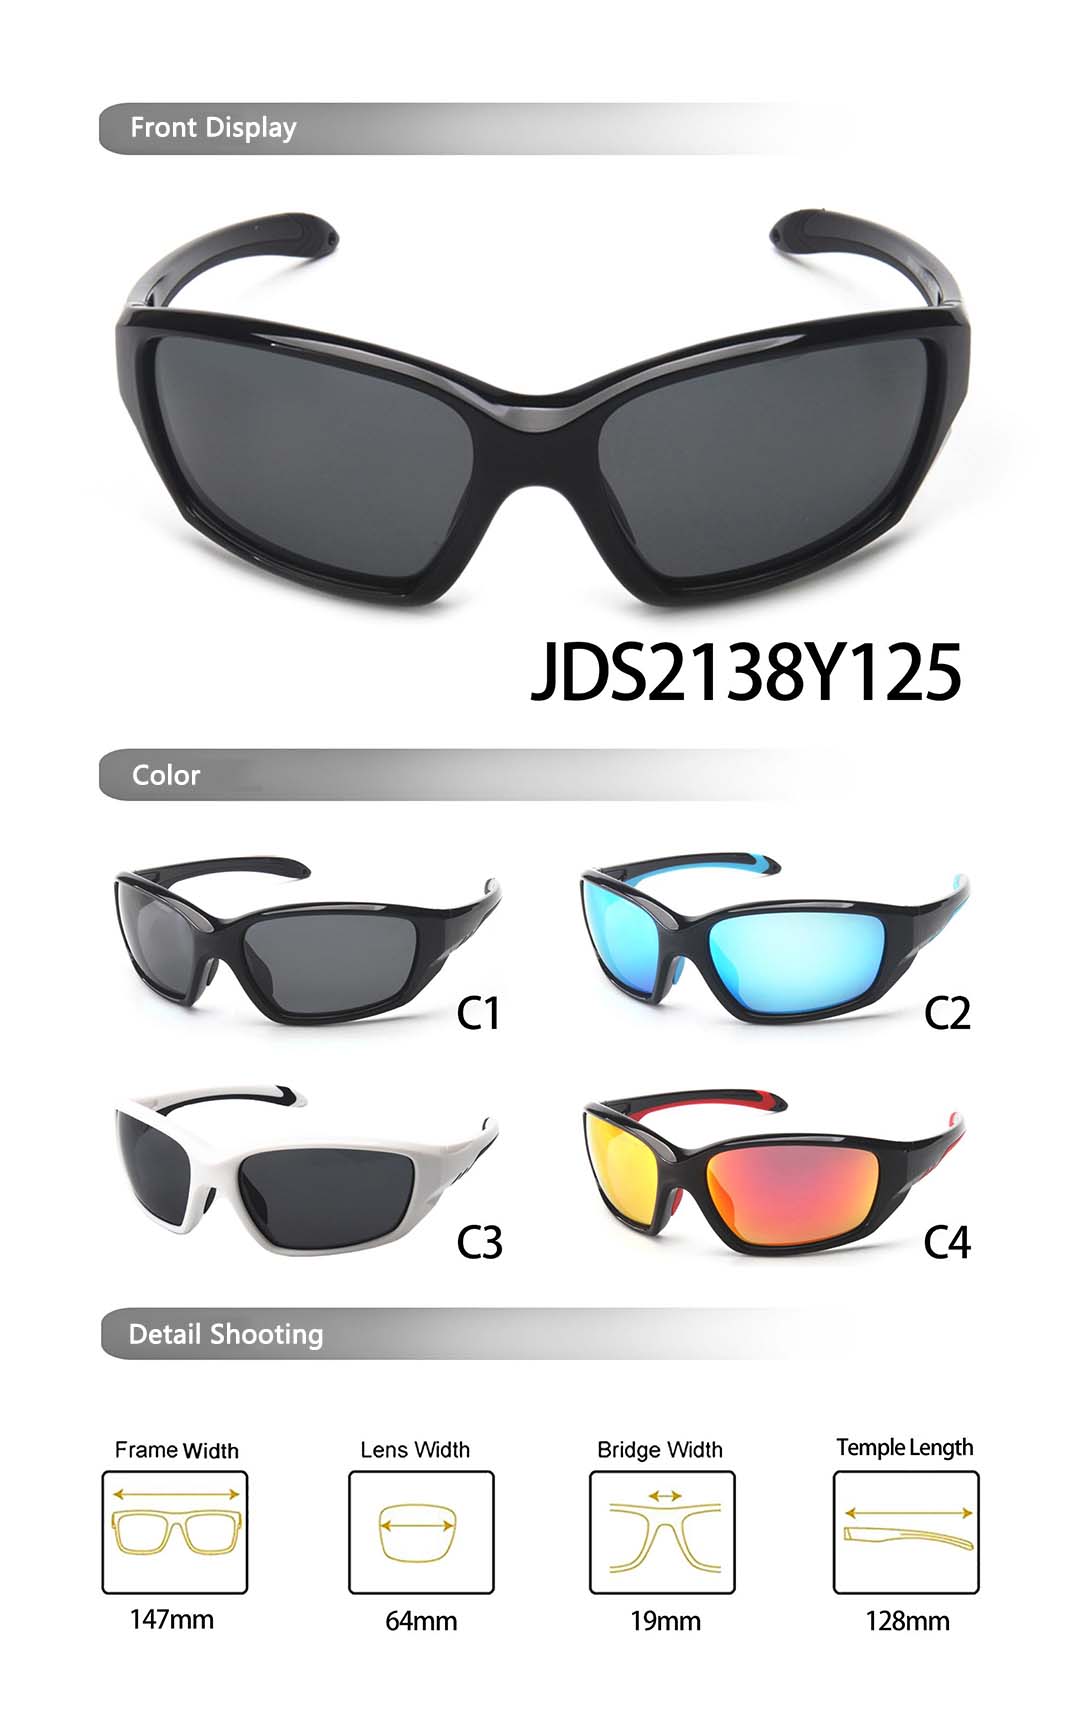 Bike Riding Sunglasses JDS2138Y125 Size and Detail Shooting